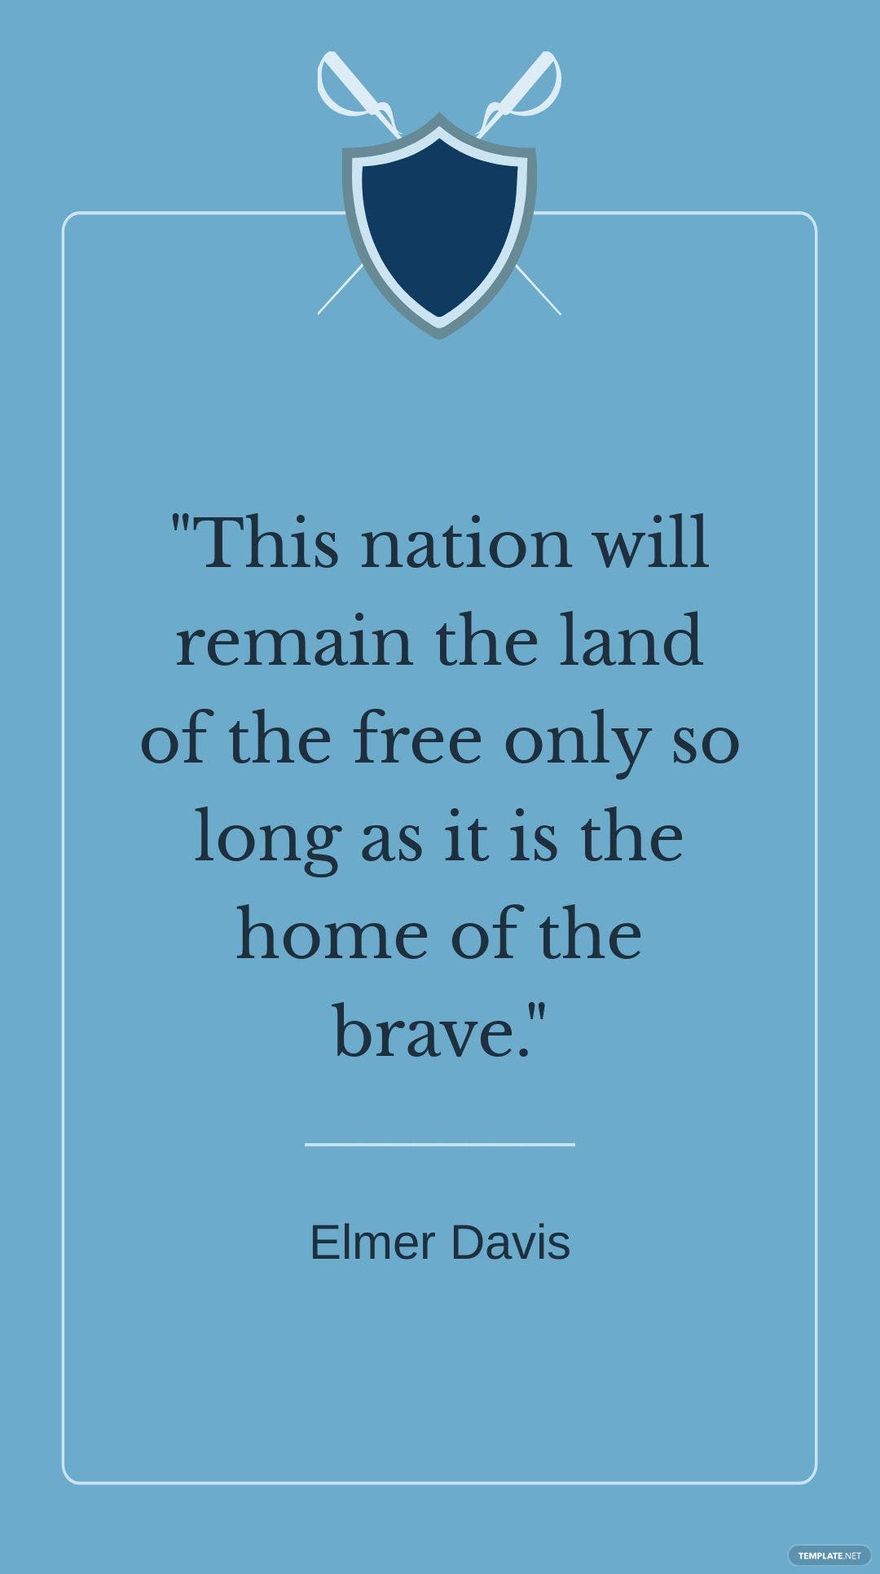 Free Elmer Davis - This nation will remain the land of the only so long as it is the home of the brave